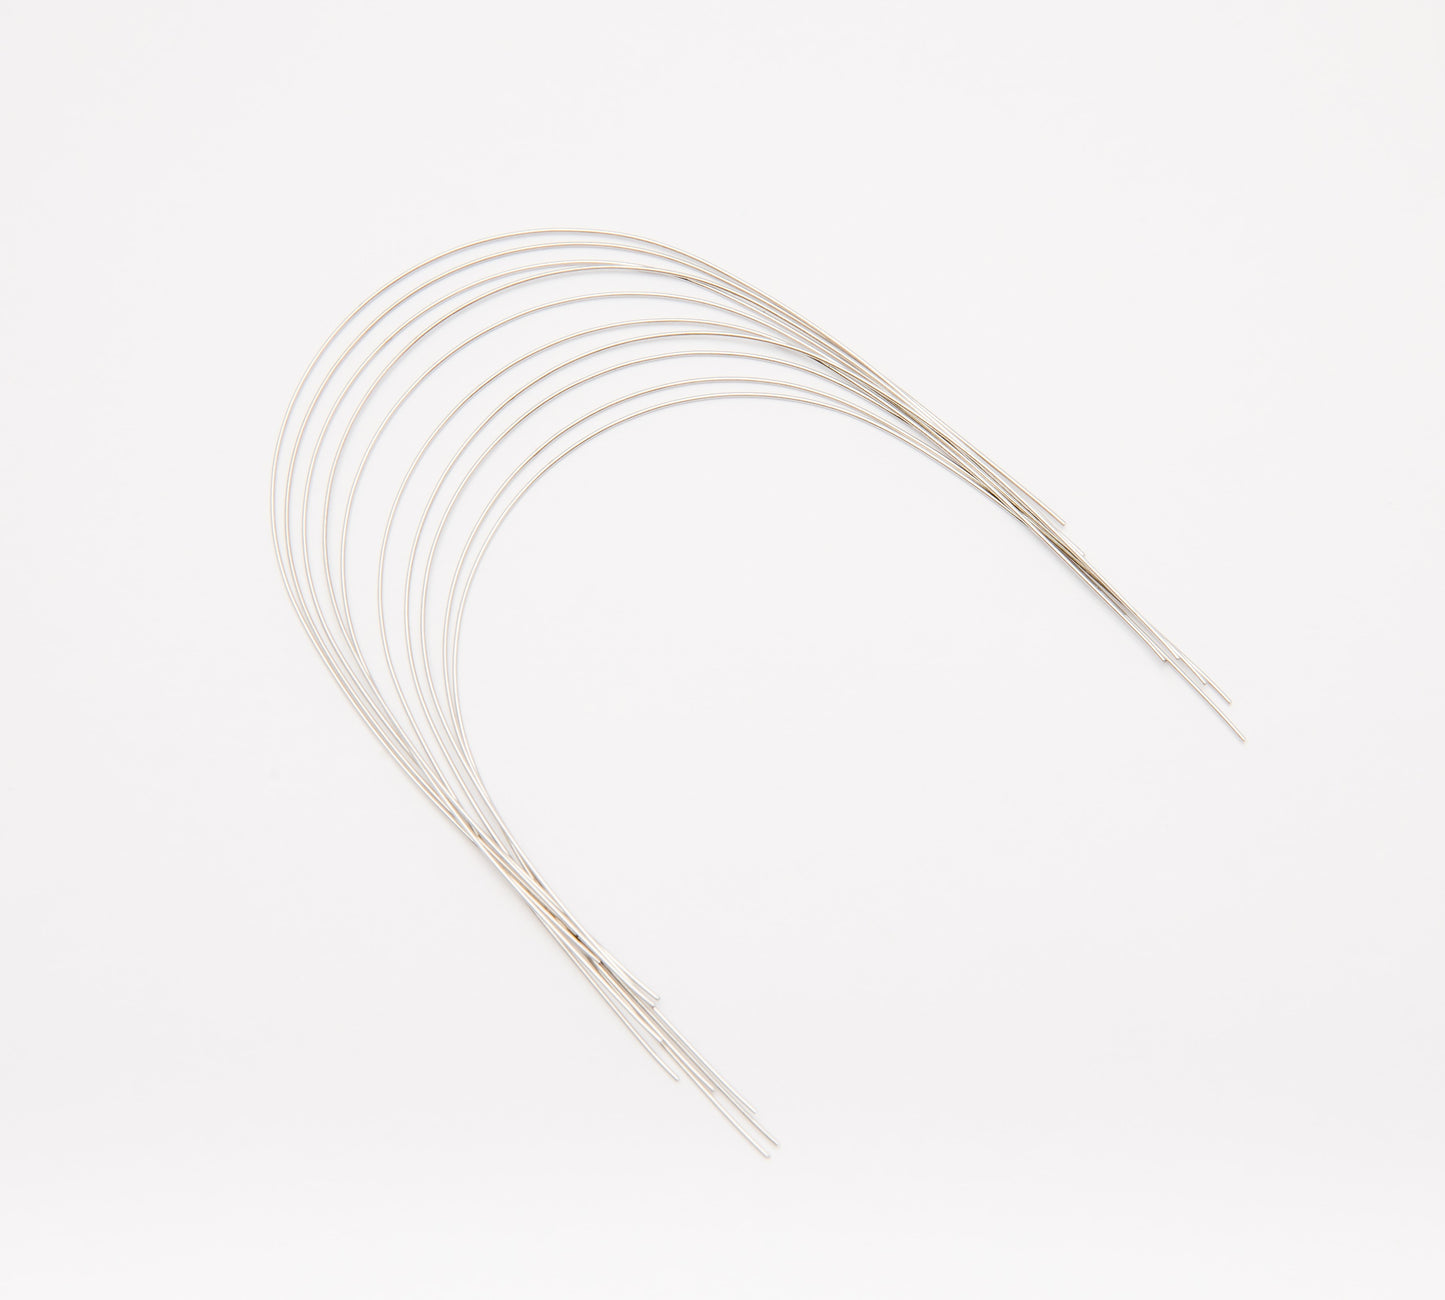 Stainless Steel Round Archwires (Pack of 10) Upper Arch